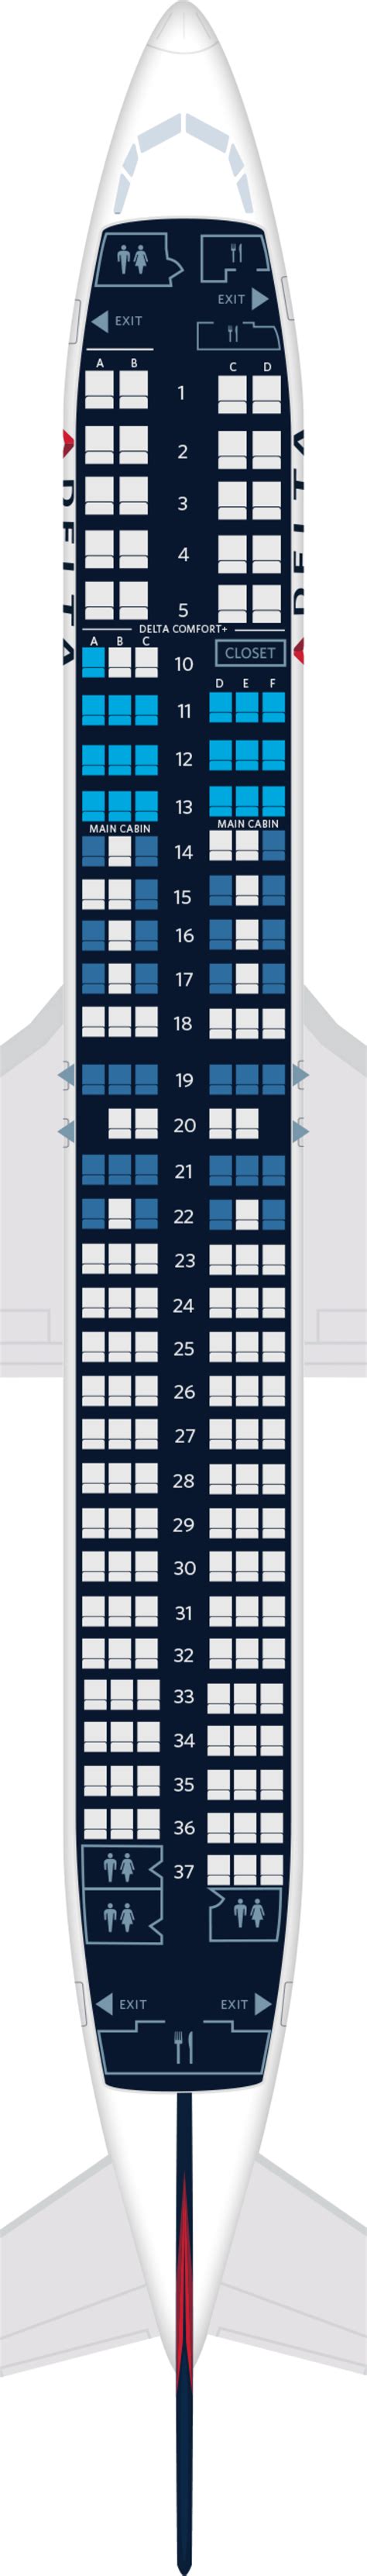 Boeing 737 900er Seating Plan | Two Birds Home